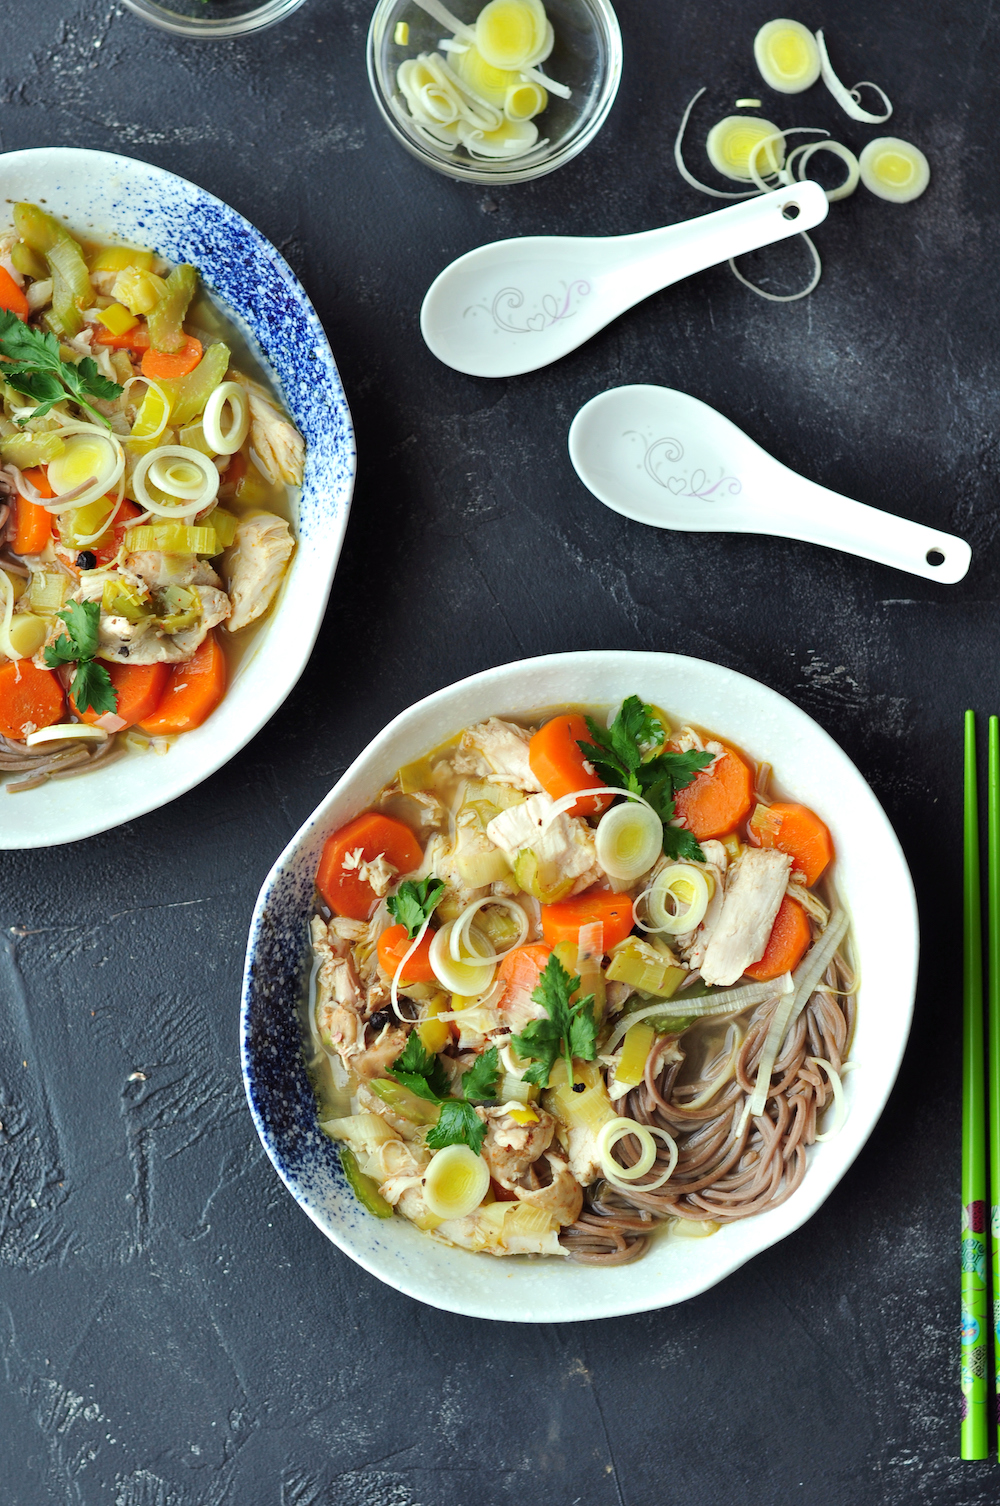 This chicken leek soup with your choice of noodles offers up a wholesome and hearty meal with some unusual twists in the flavor department.